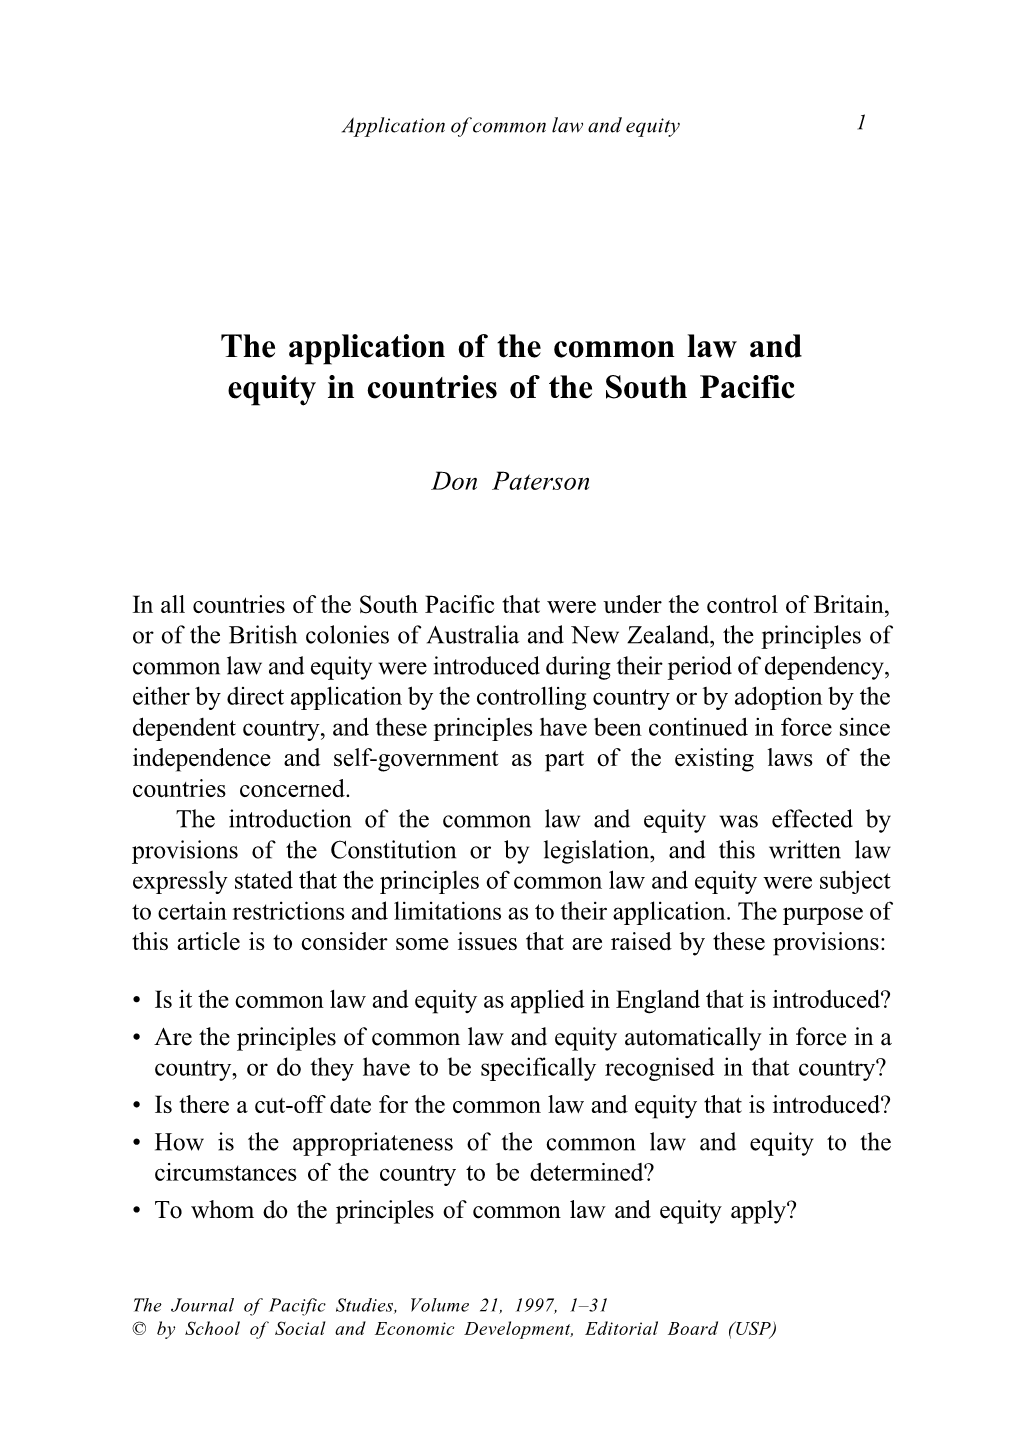 The Application of the Common Law and Equity in Countries of the South Pacific